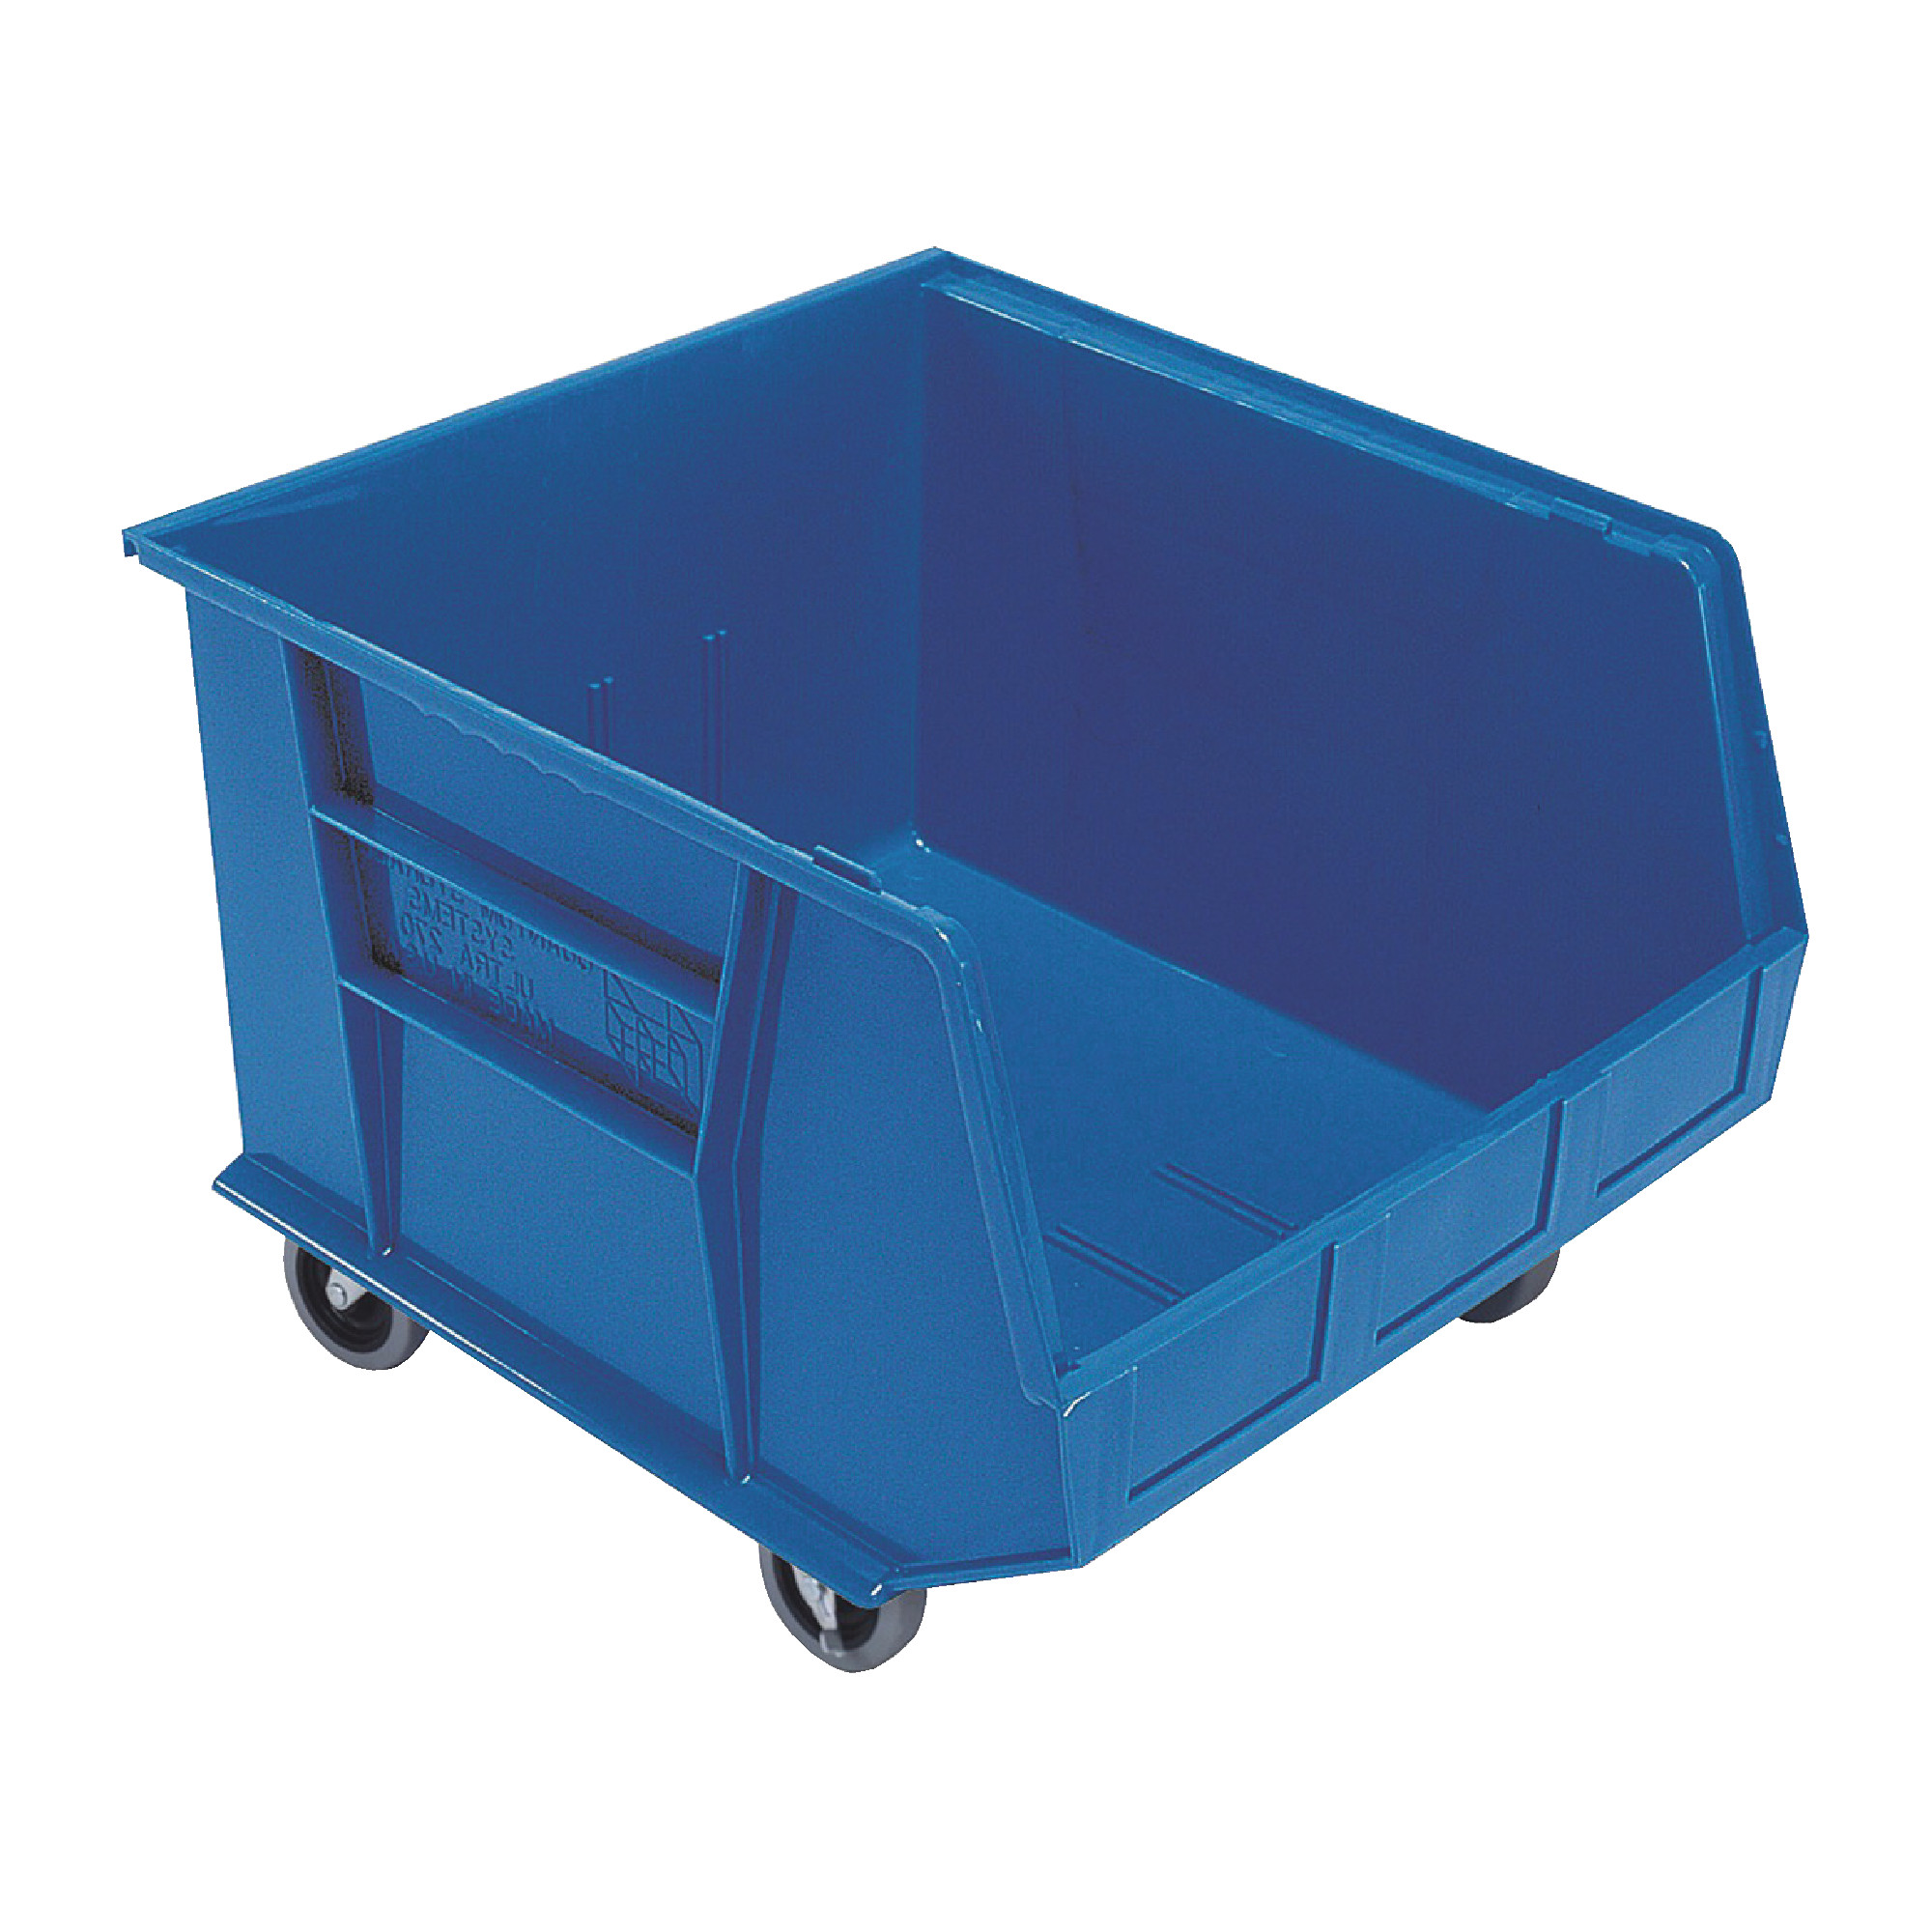 QUANTUM STORAGE SYSTEMS 18" x 16-1/2" x 11" Blue Ultra Stanck & Hang Mobile Bins - 3/Pack